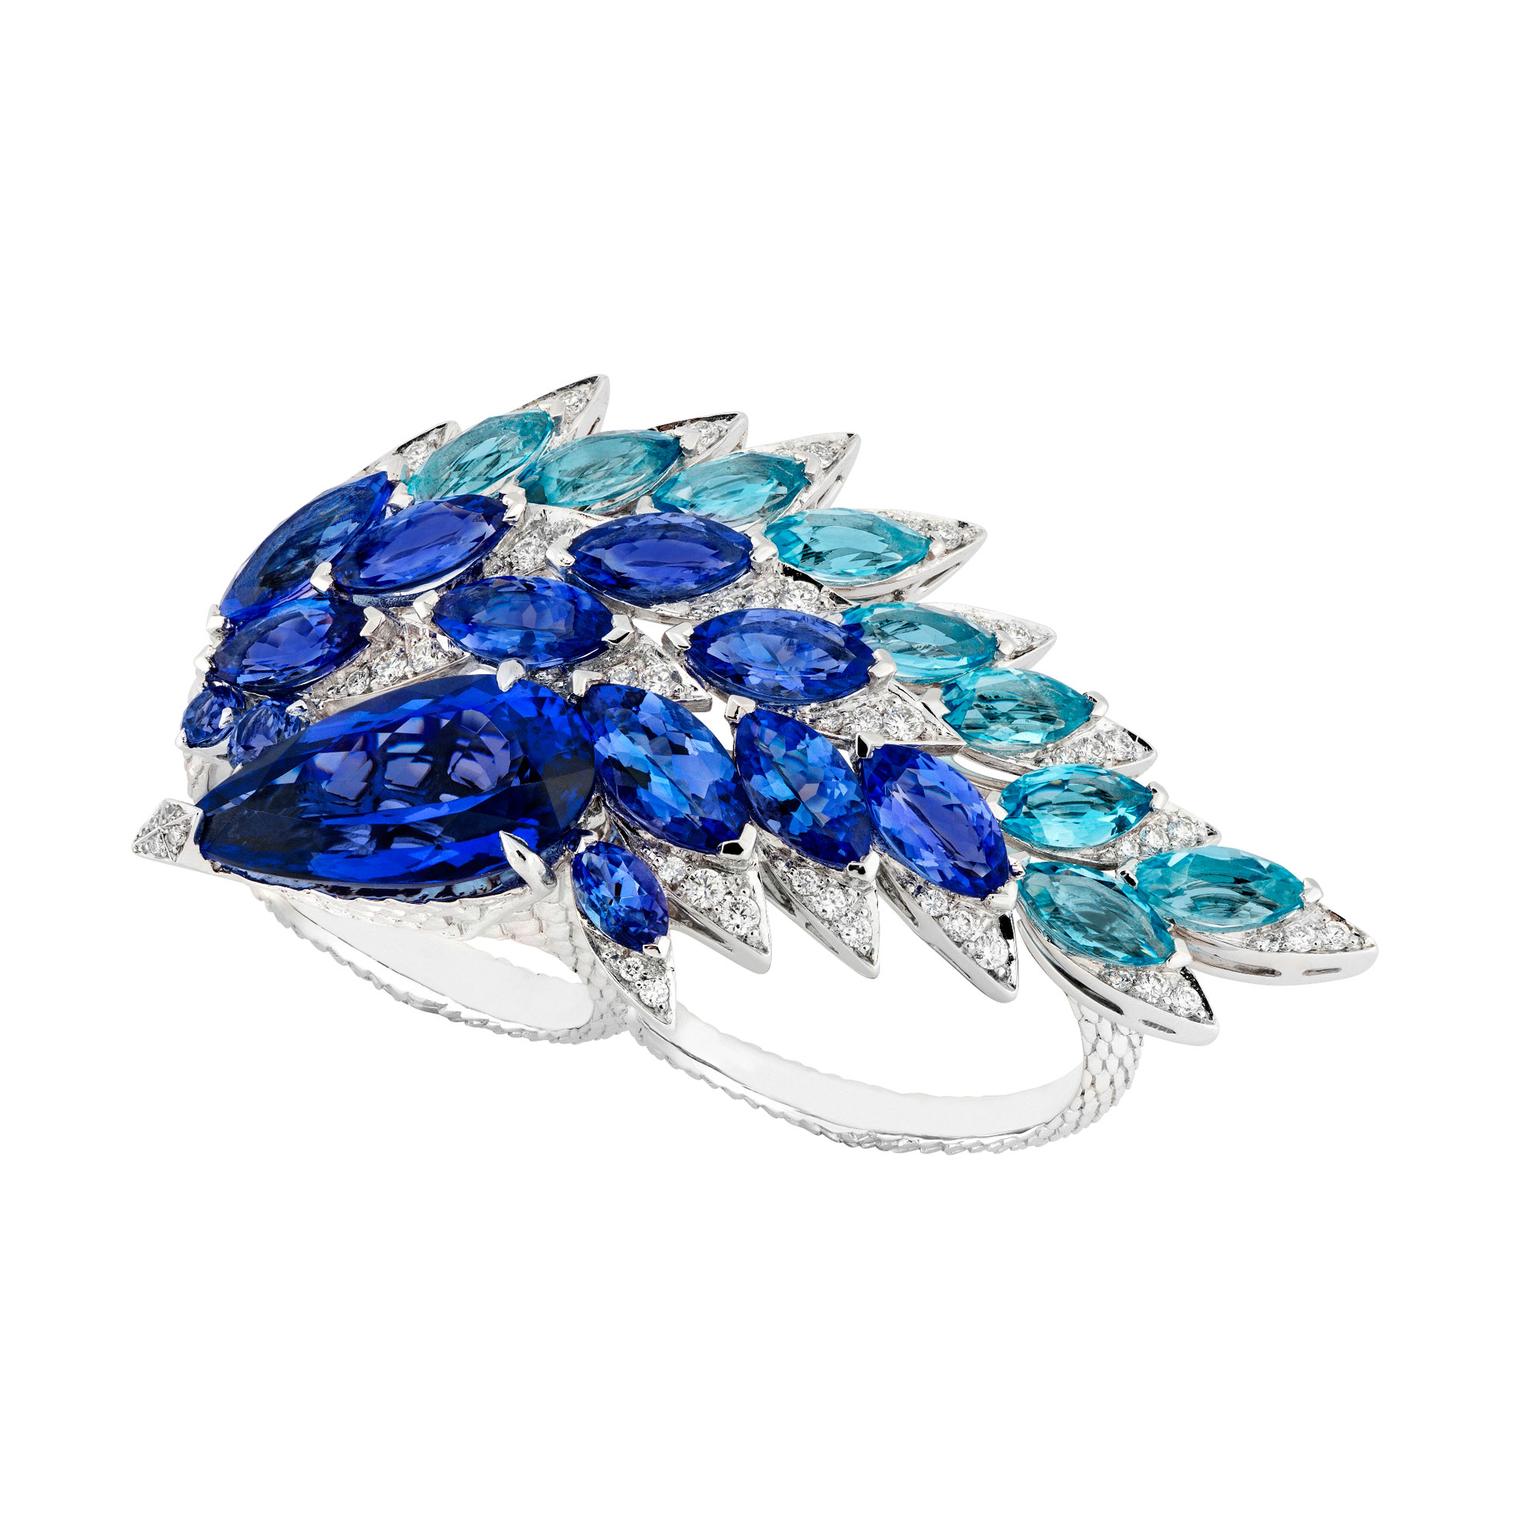 Stephen Webster marquise-cut aquamarine and tanzanite ring